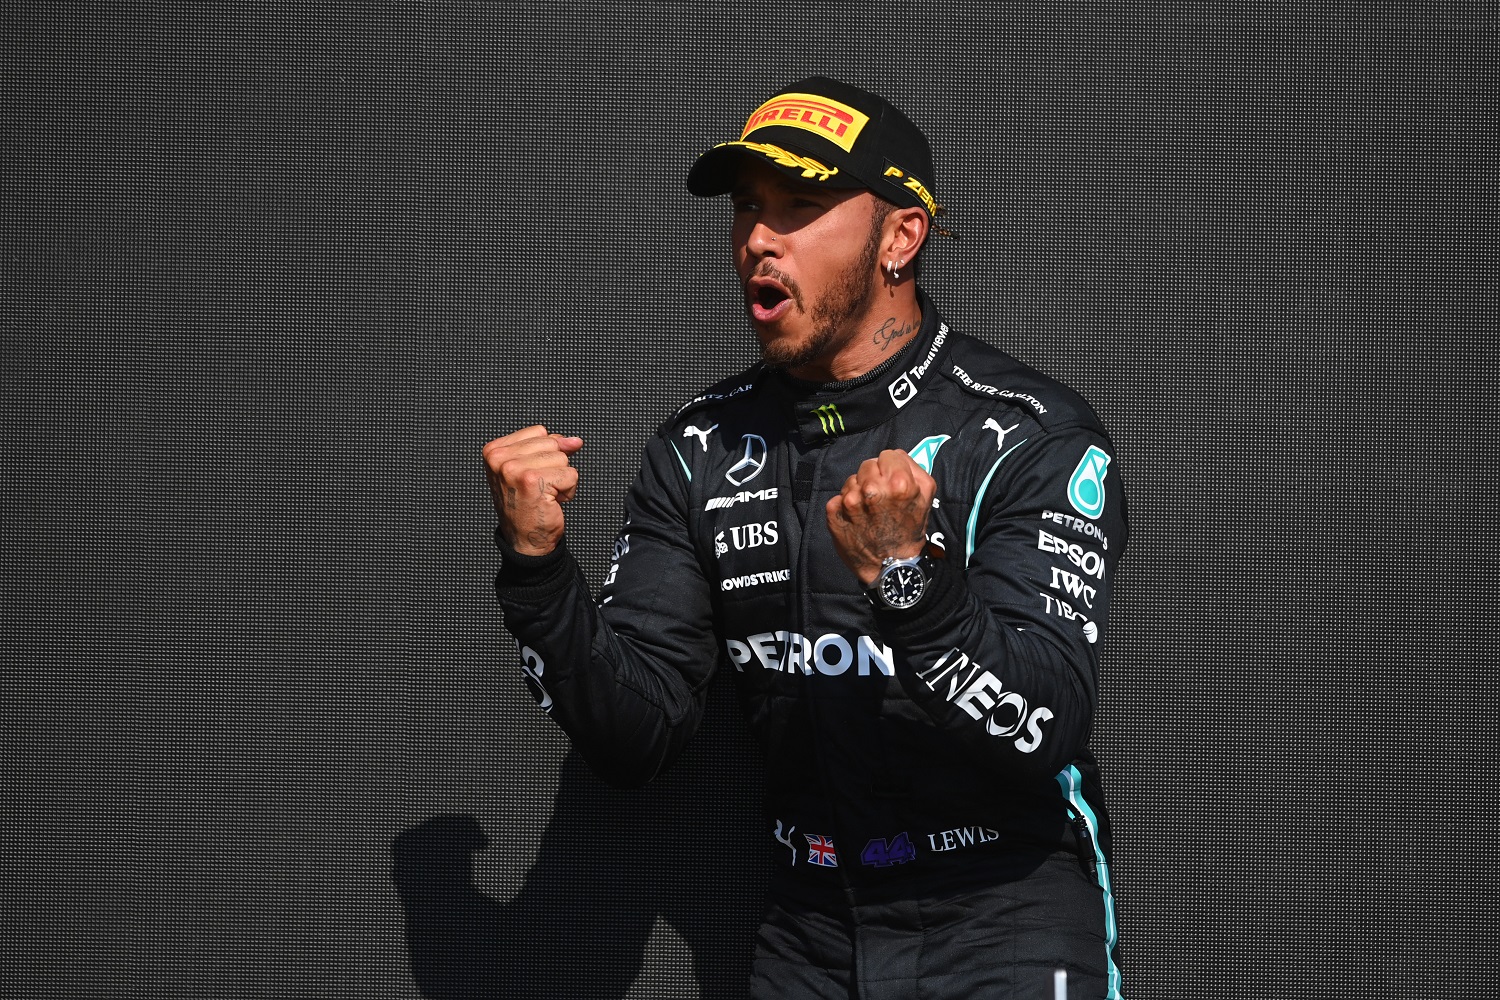 Race winner Lewis Hamilton celebrates on the podium following the Formula 1 Grand Prix of Great Britain at Silverstone. | Michael Regan/Getty Images